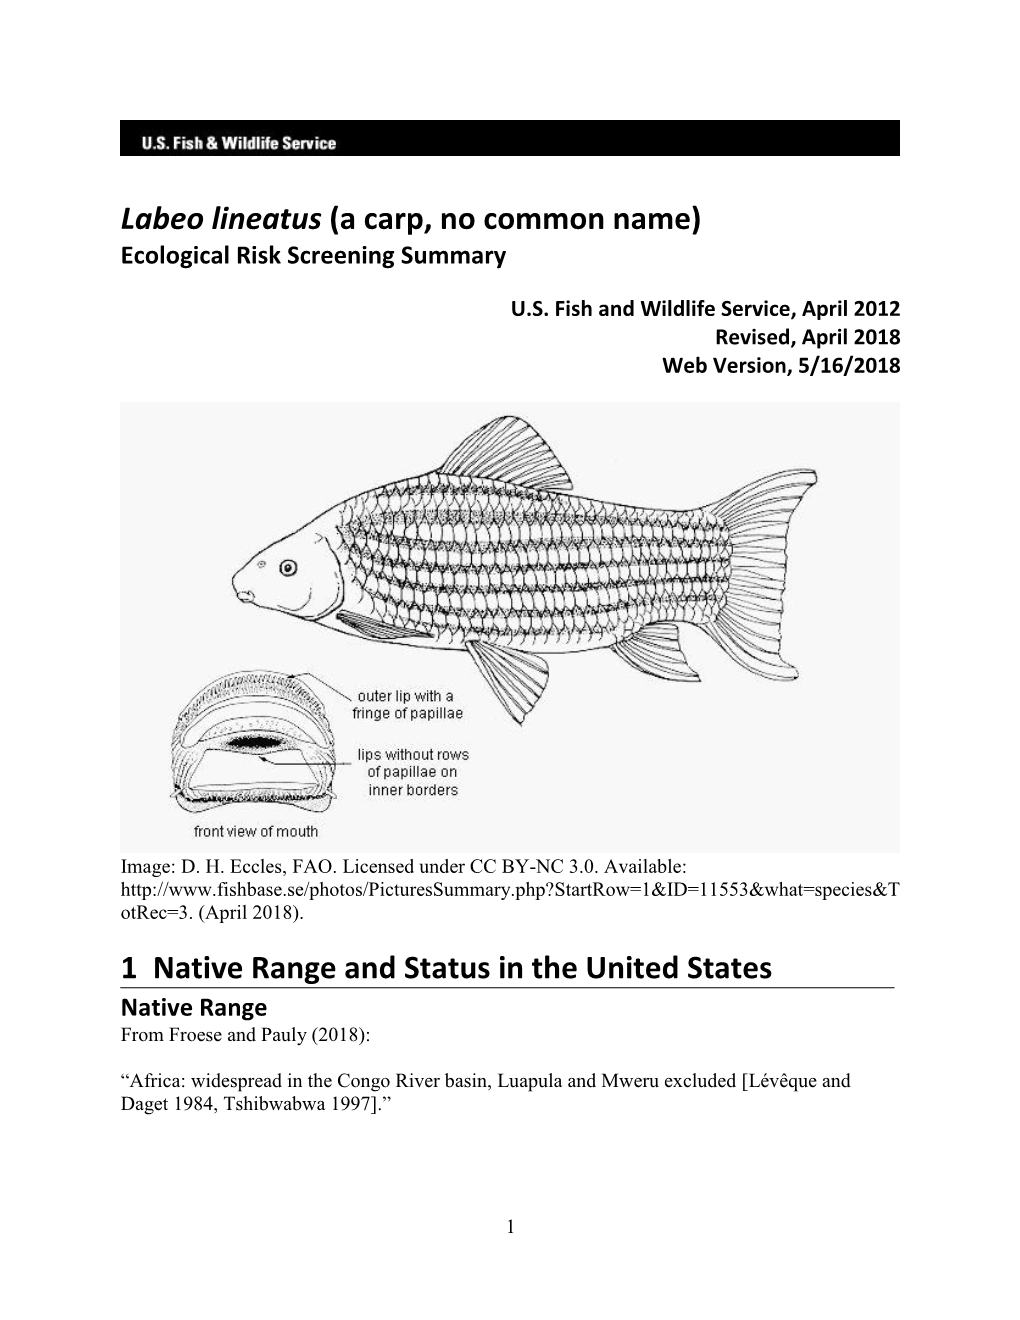 Labeo Lineatus (A Carp, No Common Name) Ecological Risk Screening Summary